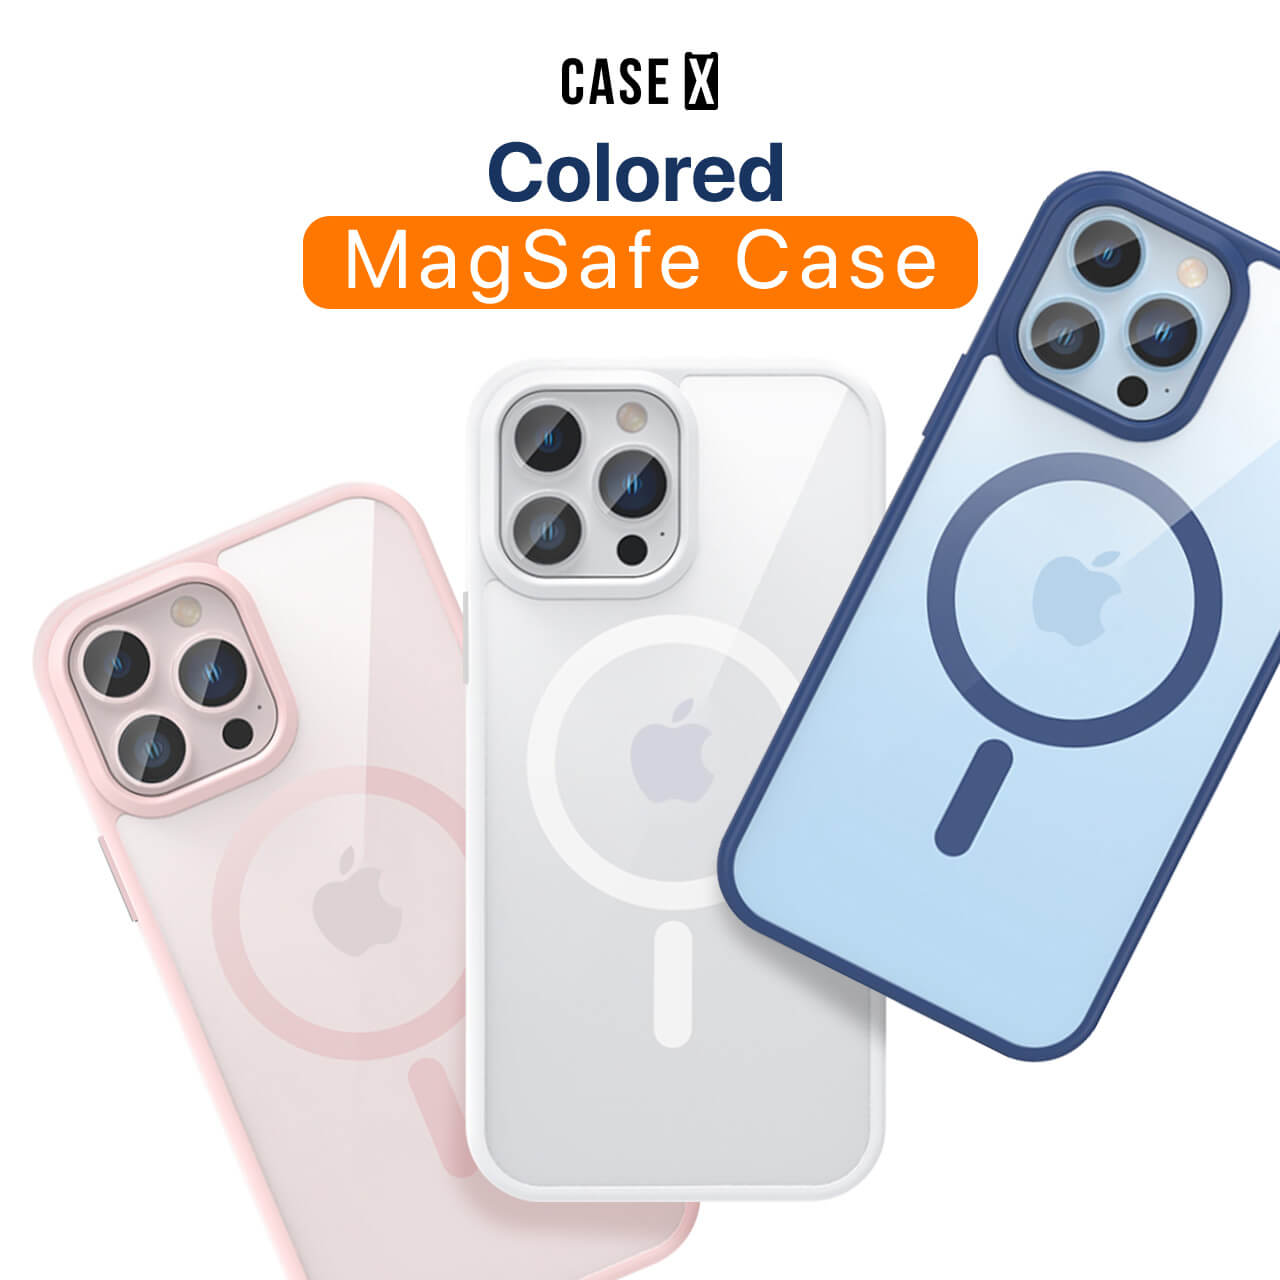 Colored Case with Magsafe